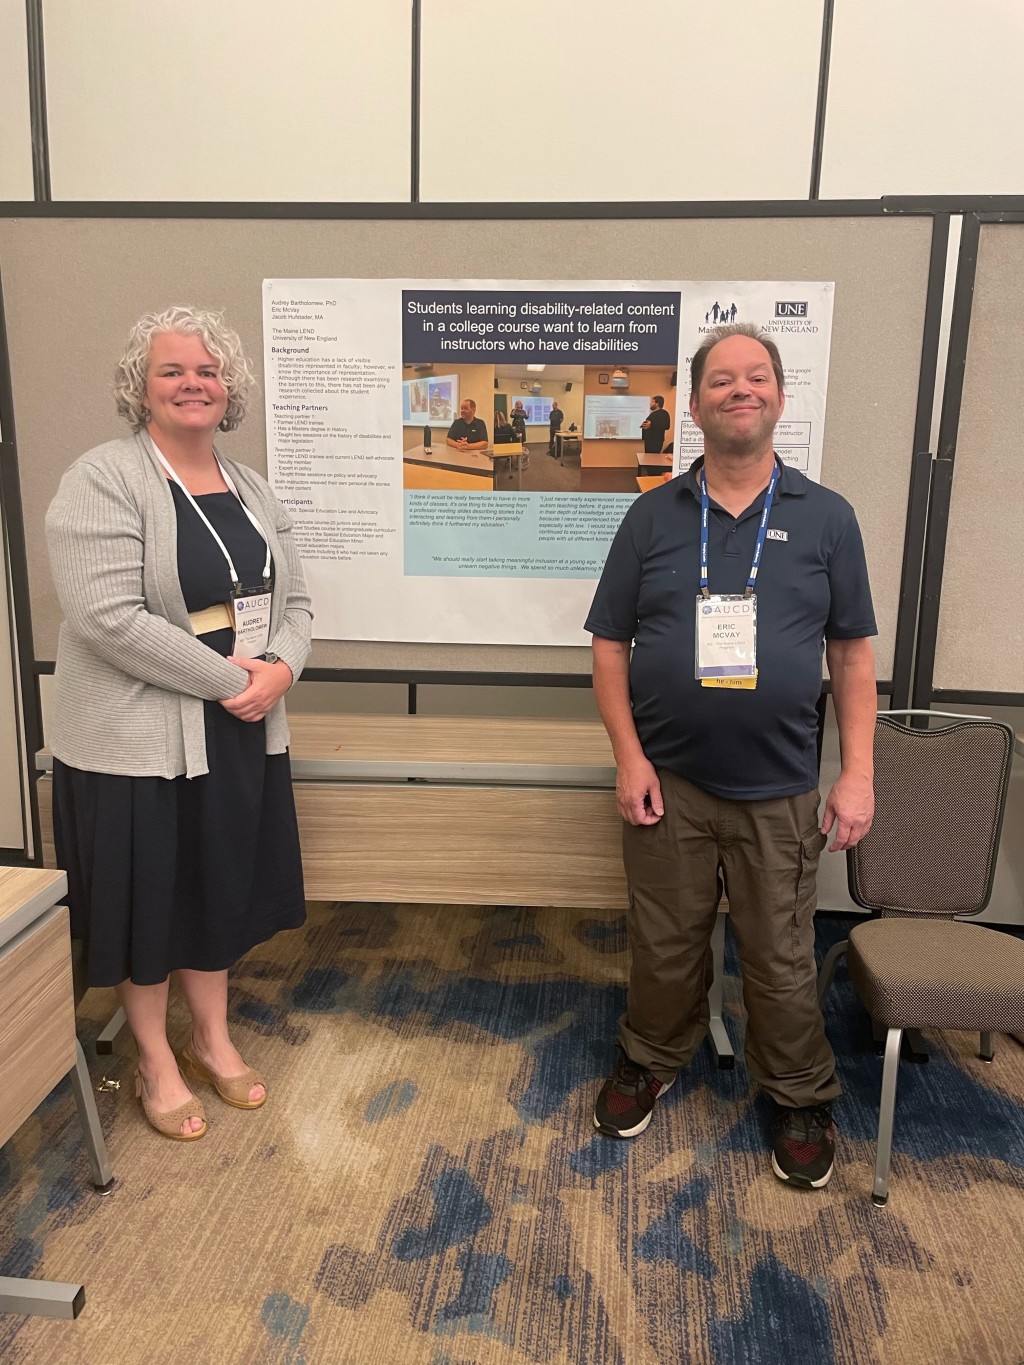 Audrey Bartholomew and Eric McVay pose in front of a research poster